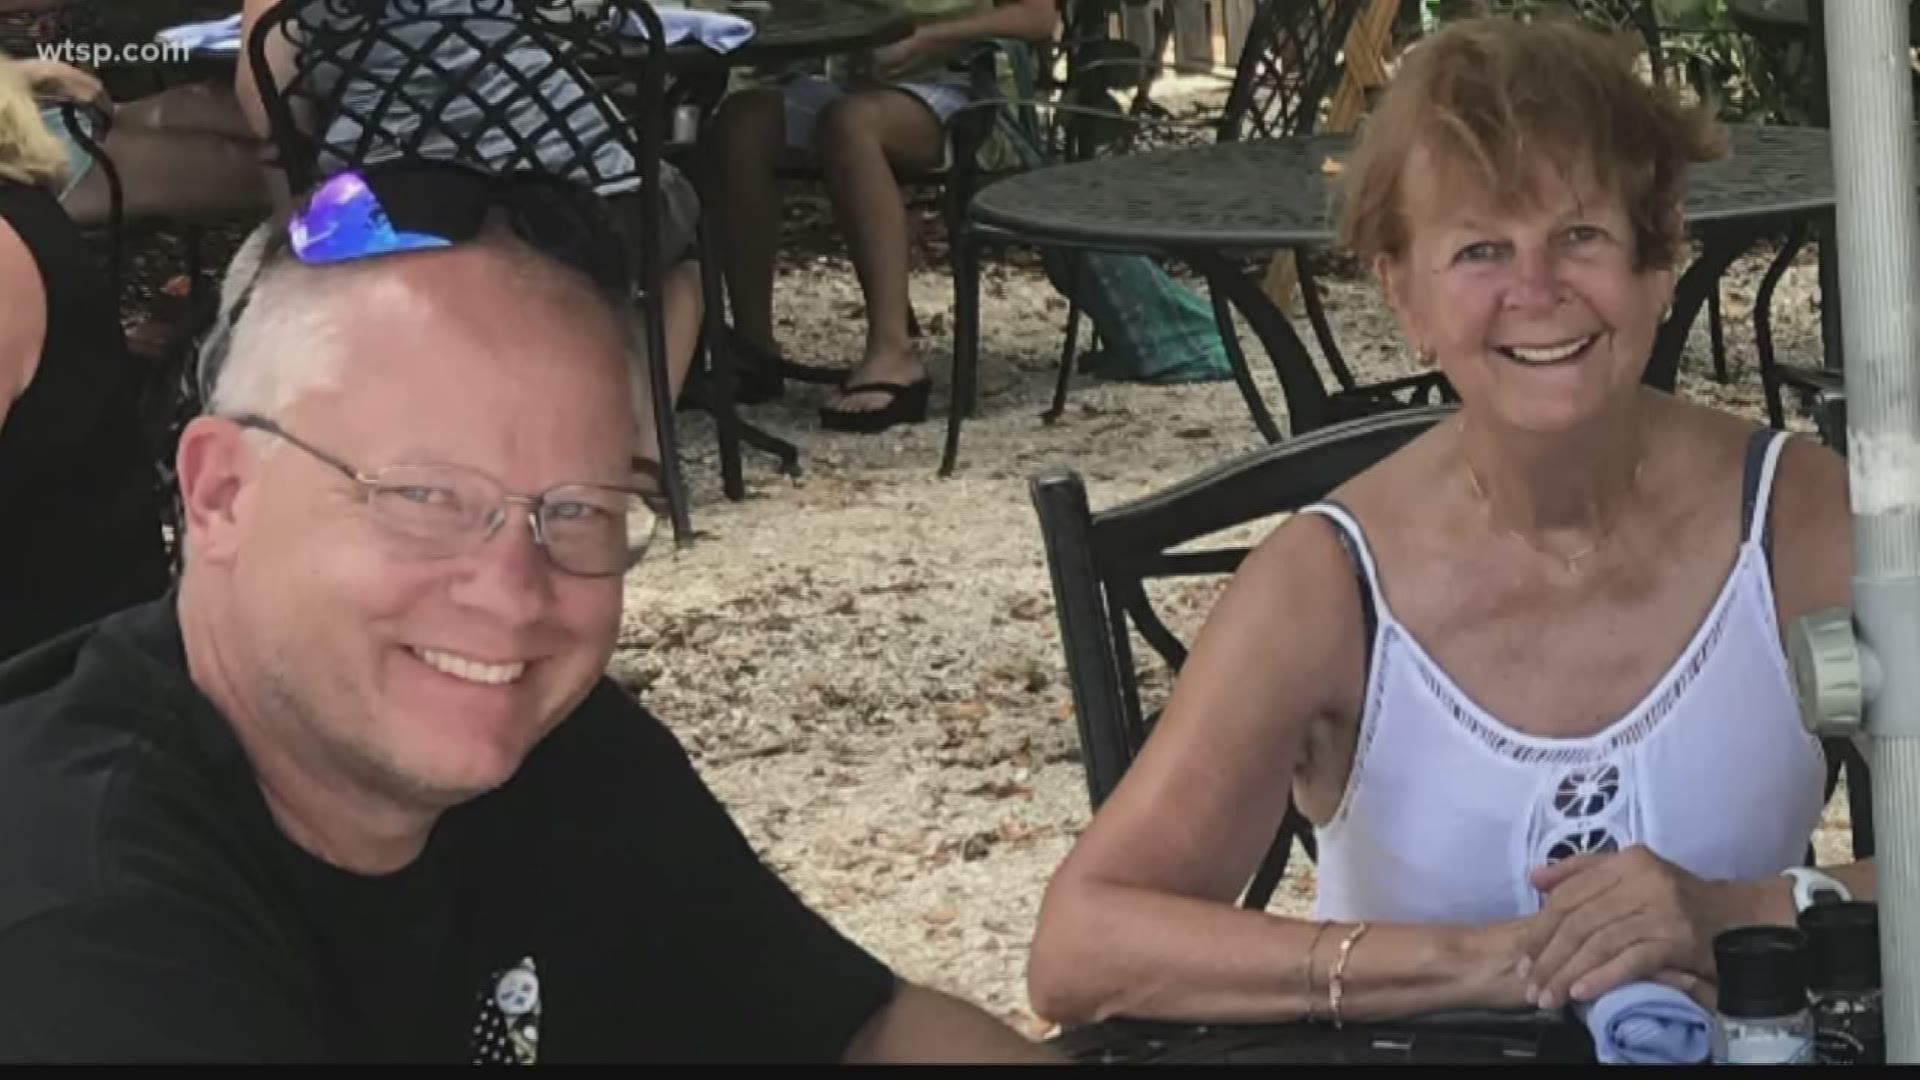 A trip to the beach turned deadly after a 77-year-old Ellenton woman contracted flesh-eating bacteria.

Lynn Fleming died last week after she and her family took a trip to Coquina Beach on Anna Maria Island. Fleming's son, Wade Fleming, said his mom tripped and scraped her leg while walking on the beach.

The family said a lifeguard bandaged the scrape, and the next day Fleming got a tetanus shot.p